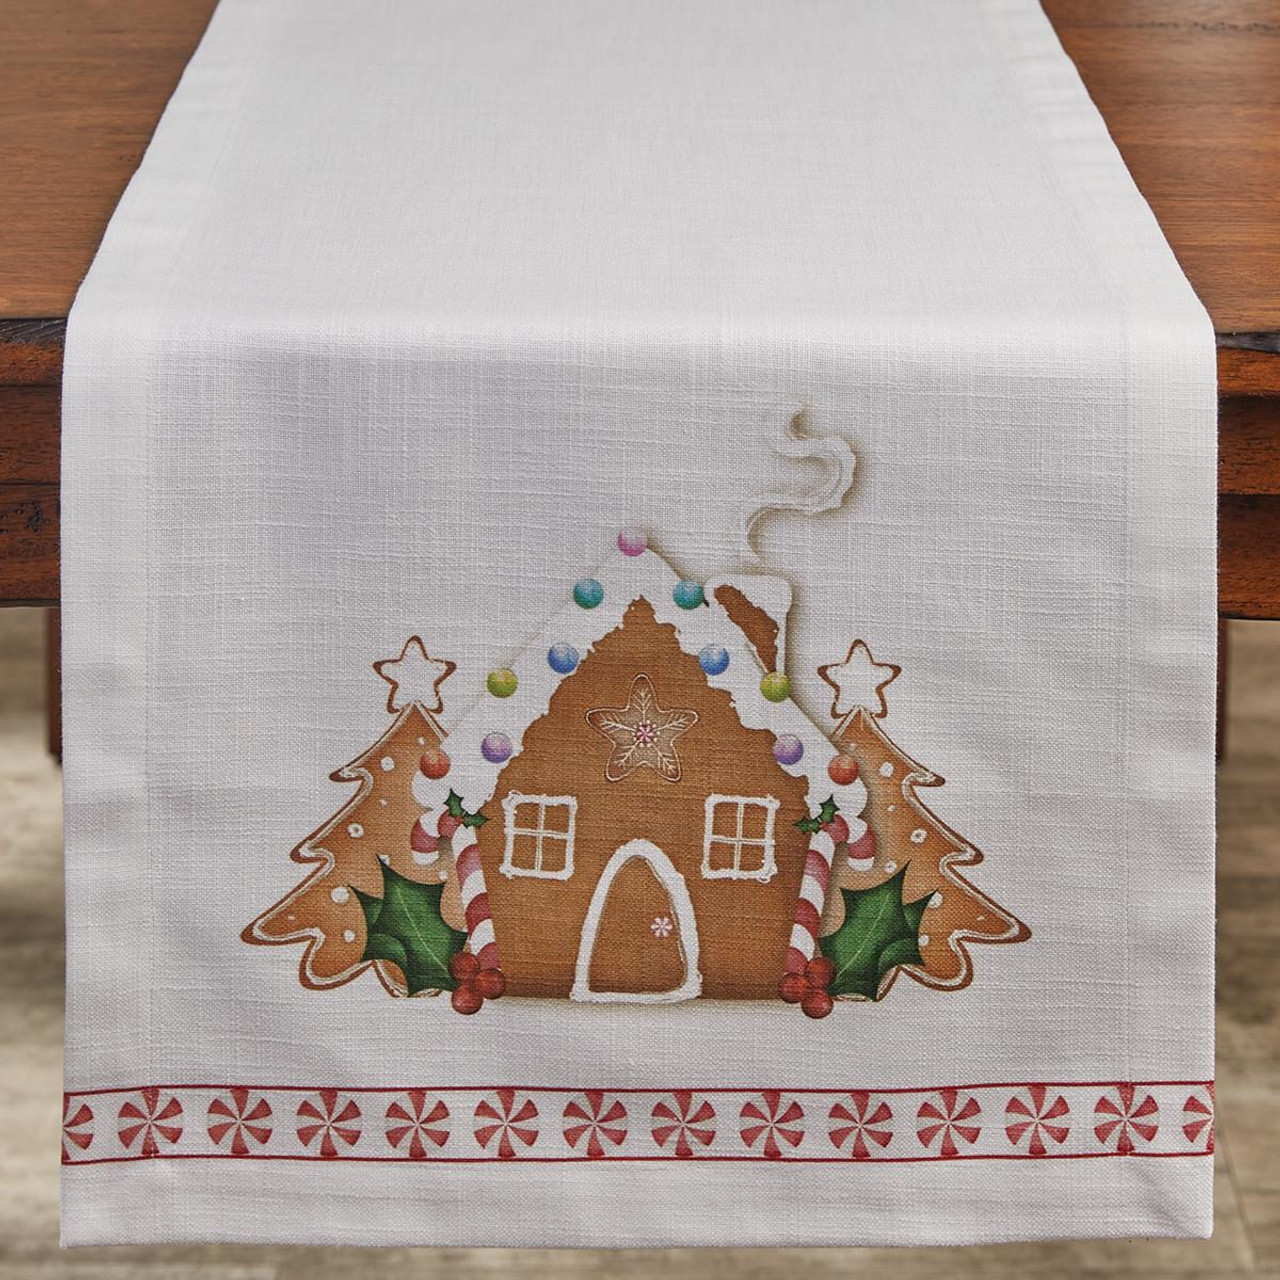 https://cdn11.bigcommerce.com/s-tfdhmk/images/stencil/1280x1280/products/24463/185863/Gingerbread-Table-Runner-House-15x54-762242059009_image4__87250.1697216459.jpg?c=2